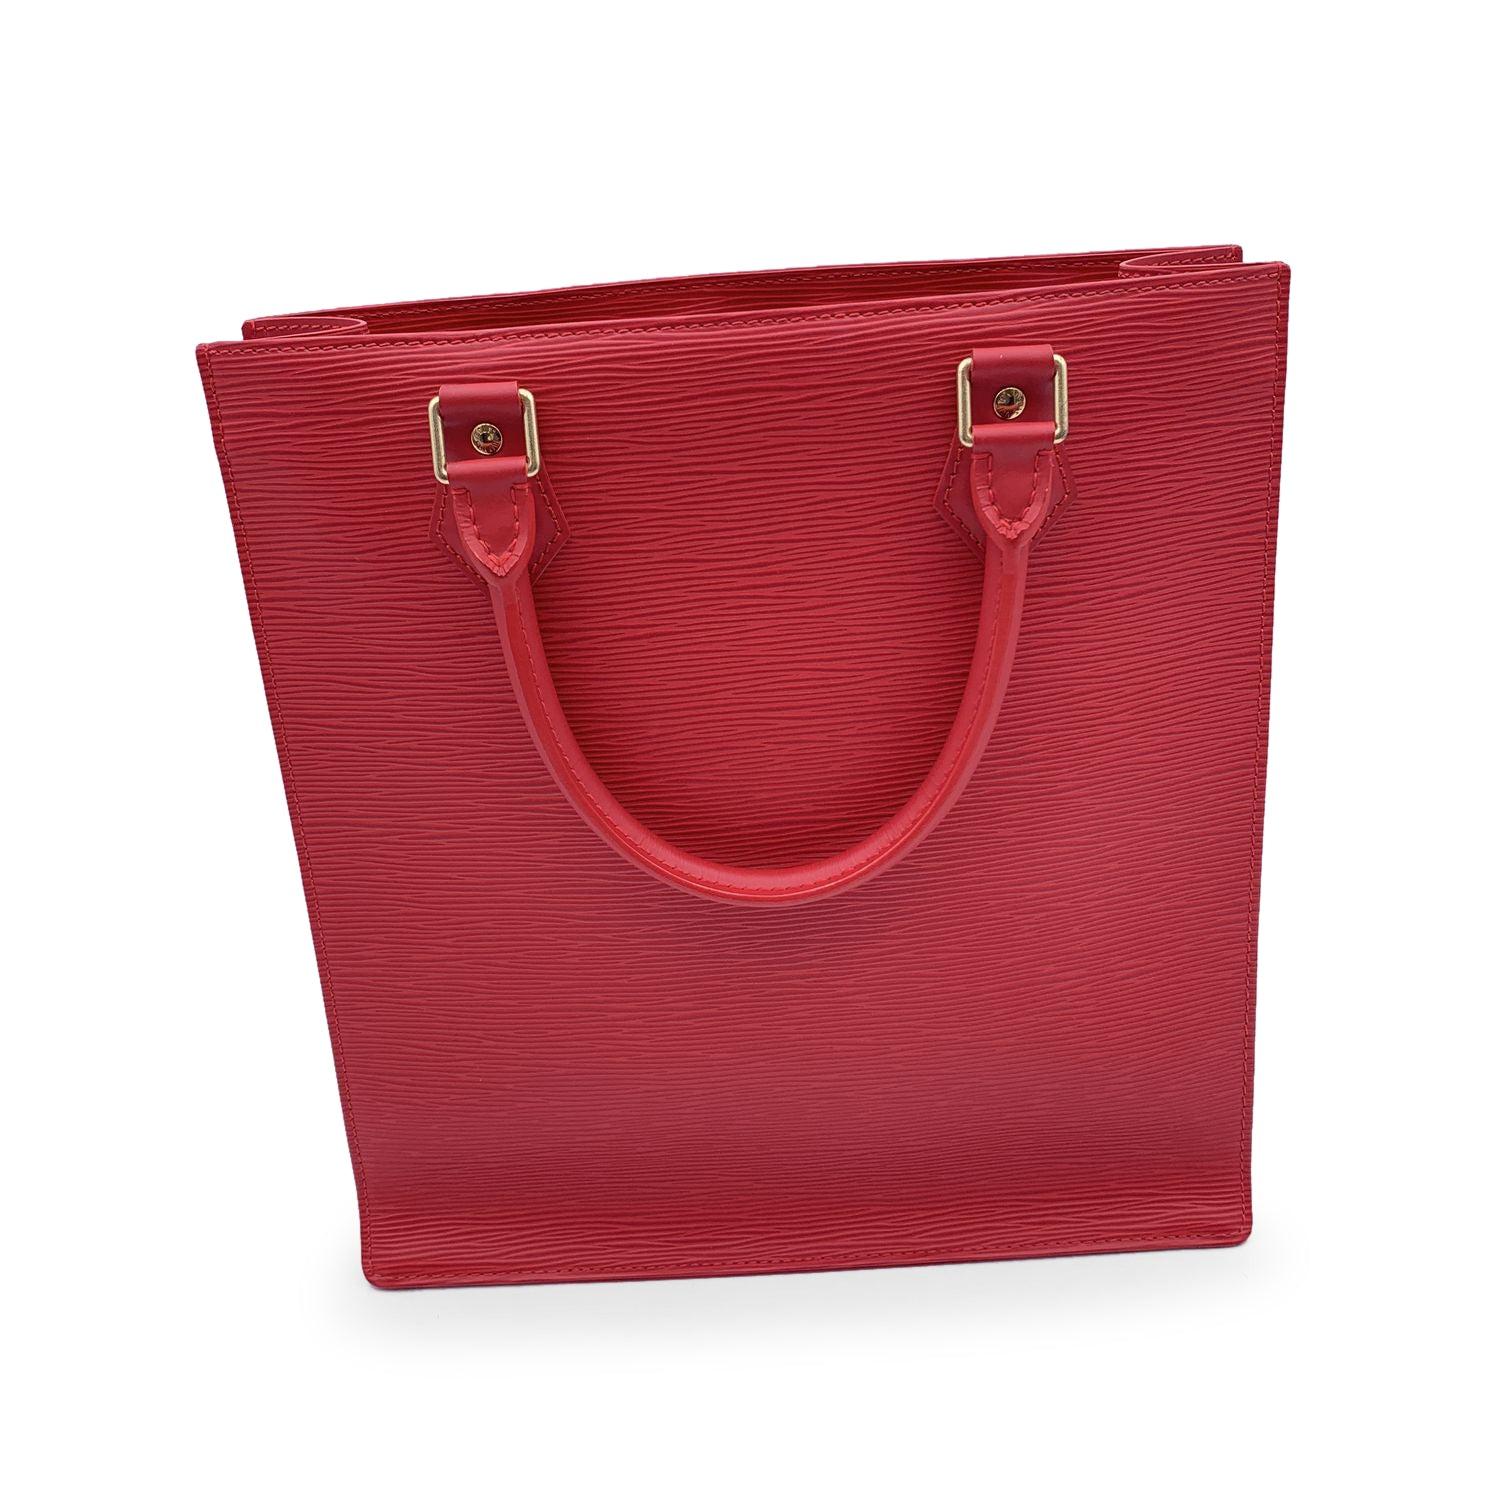 Louis Vuitton Red Epi Leather Sac Plat PM Tote Shopping Bag M5274E In Excellent Condition For Sale In Rome, Rome